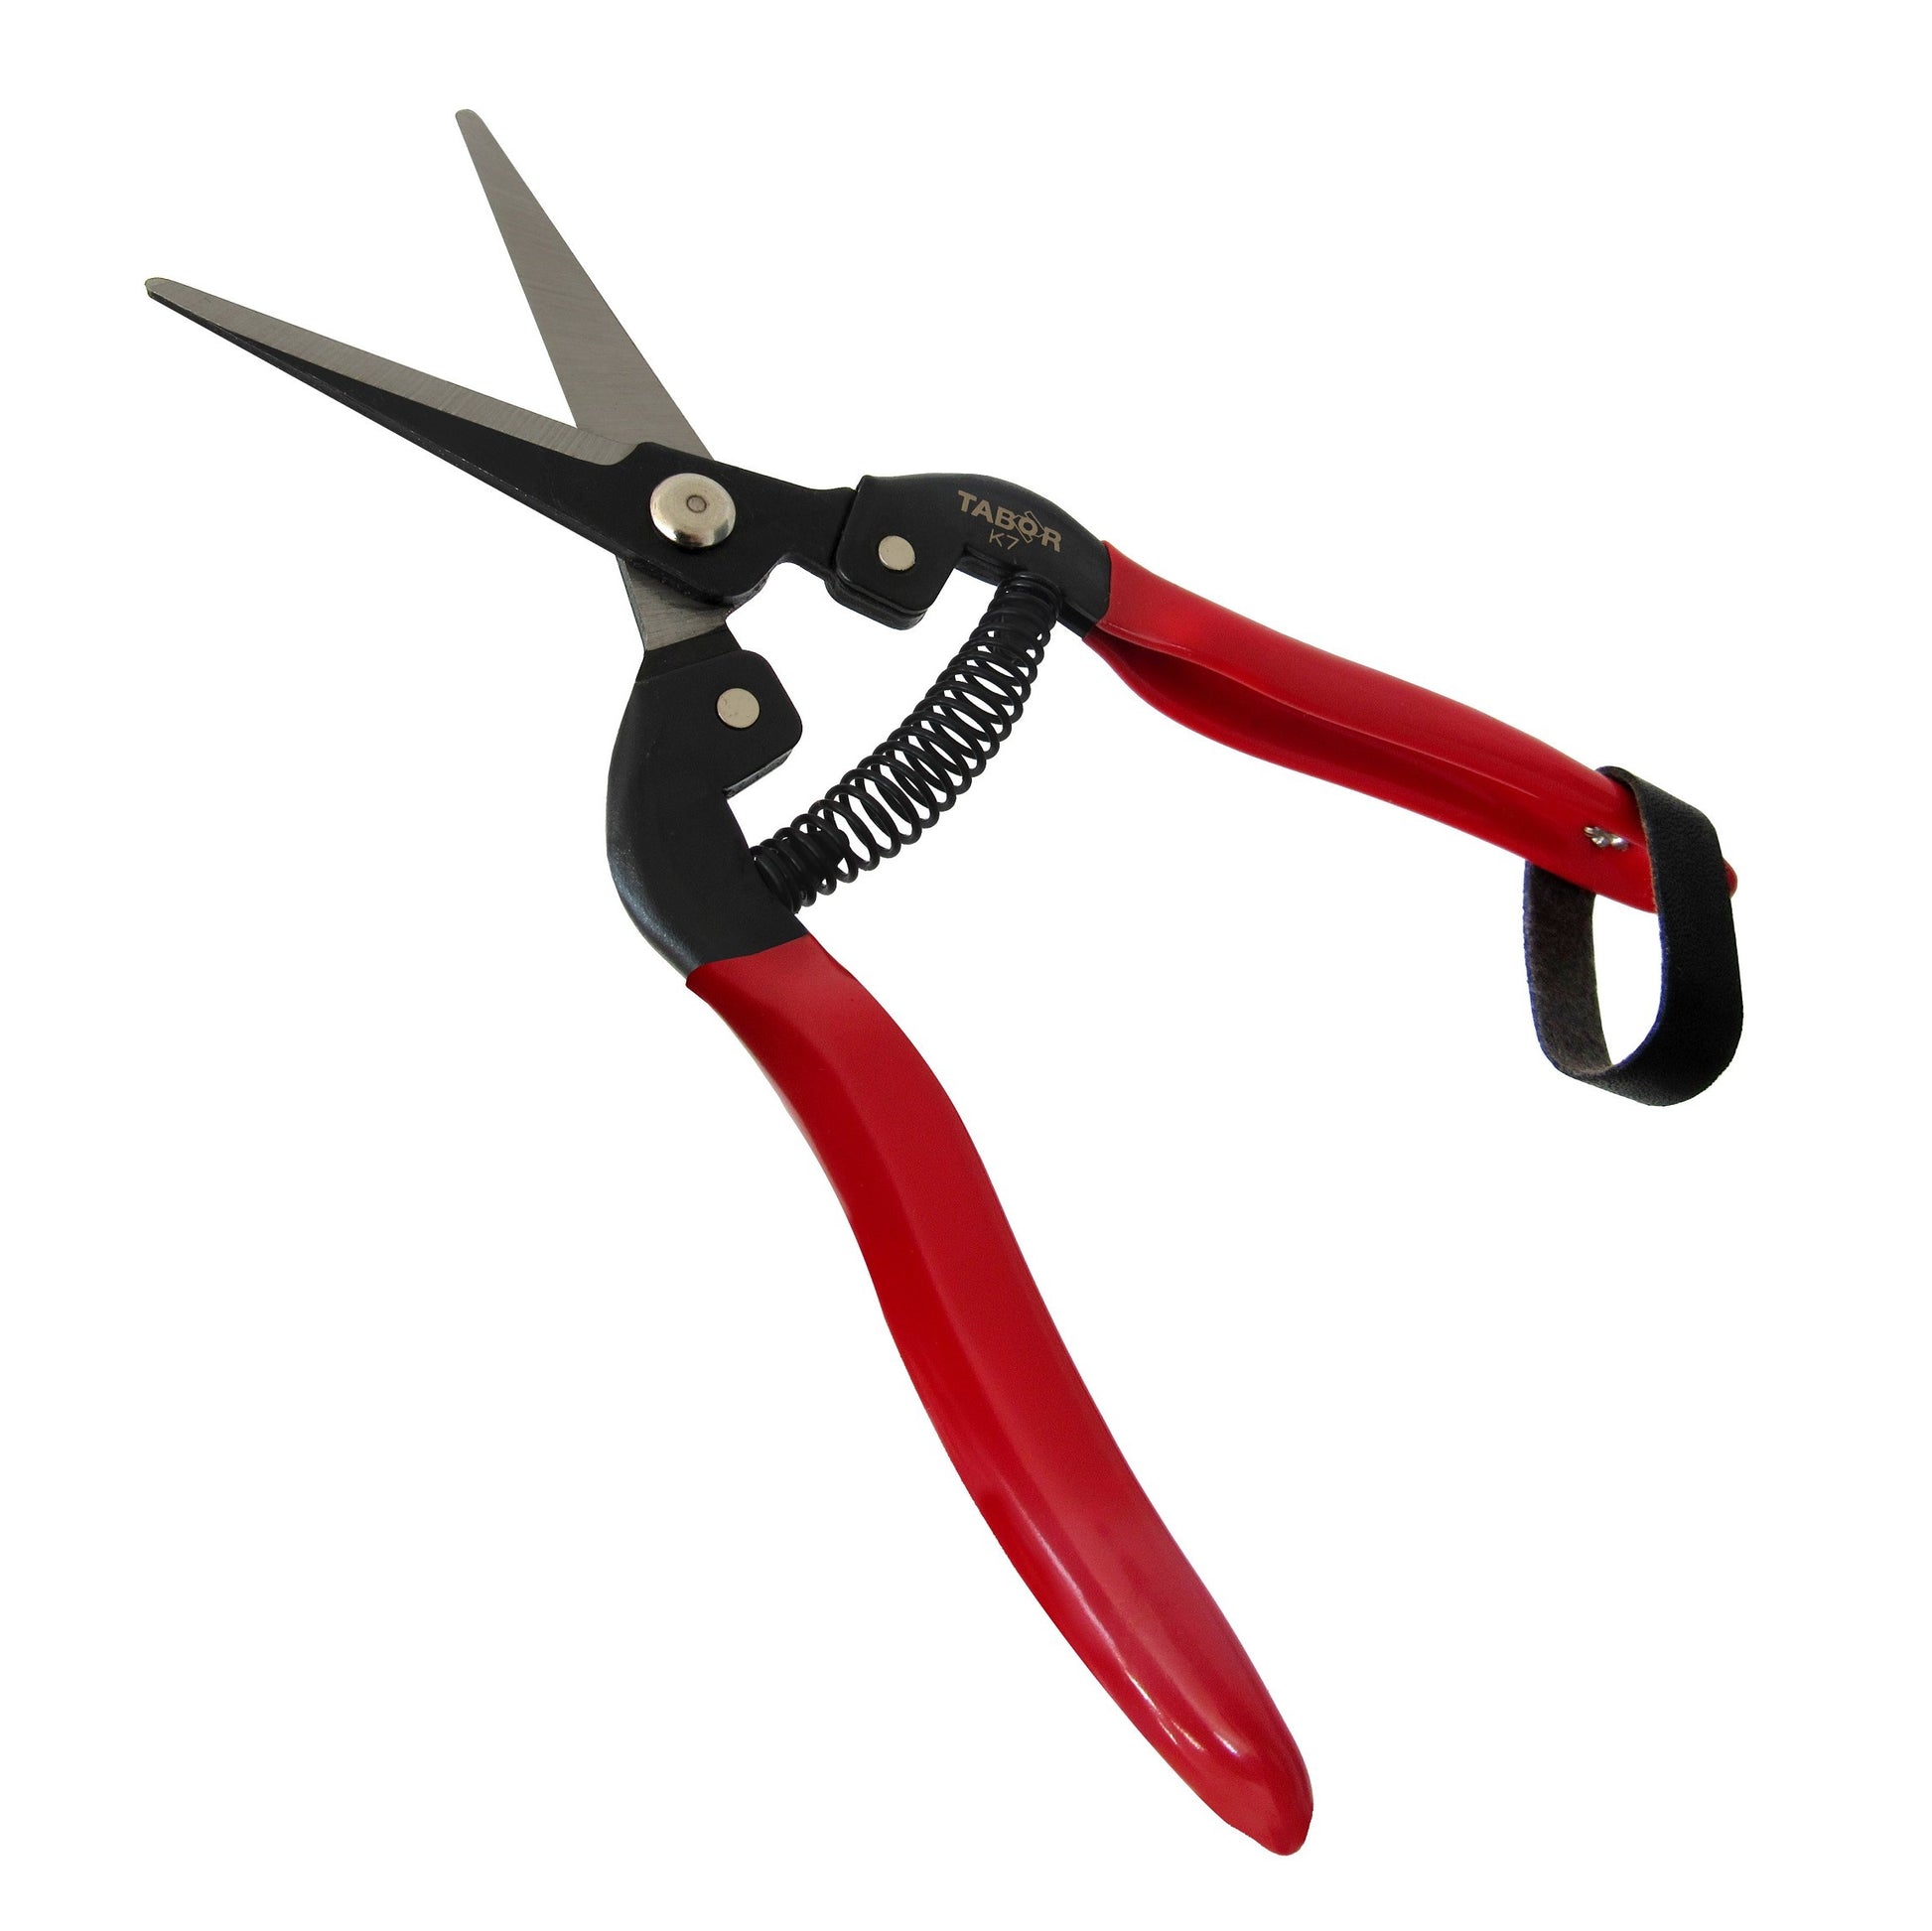 Tabor Tools K-7 Straight Pruning and Trimming Scissors